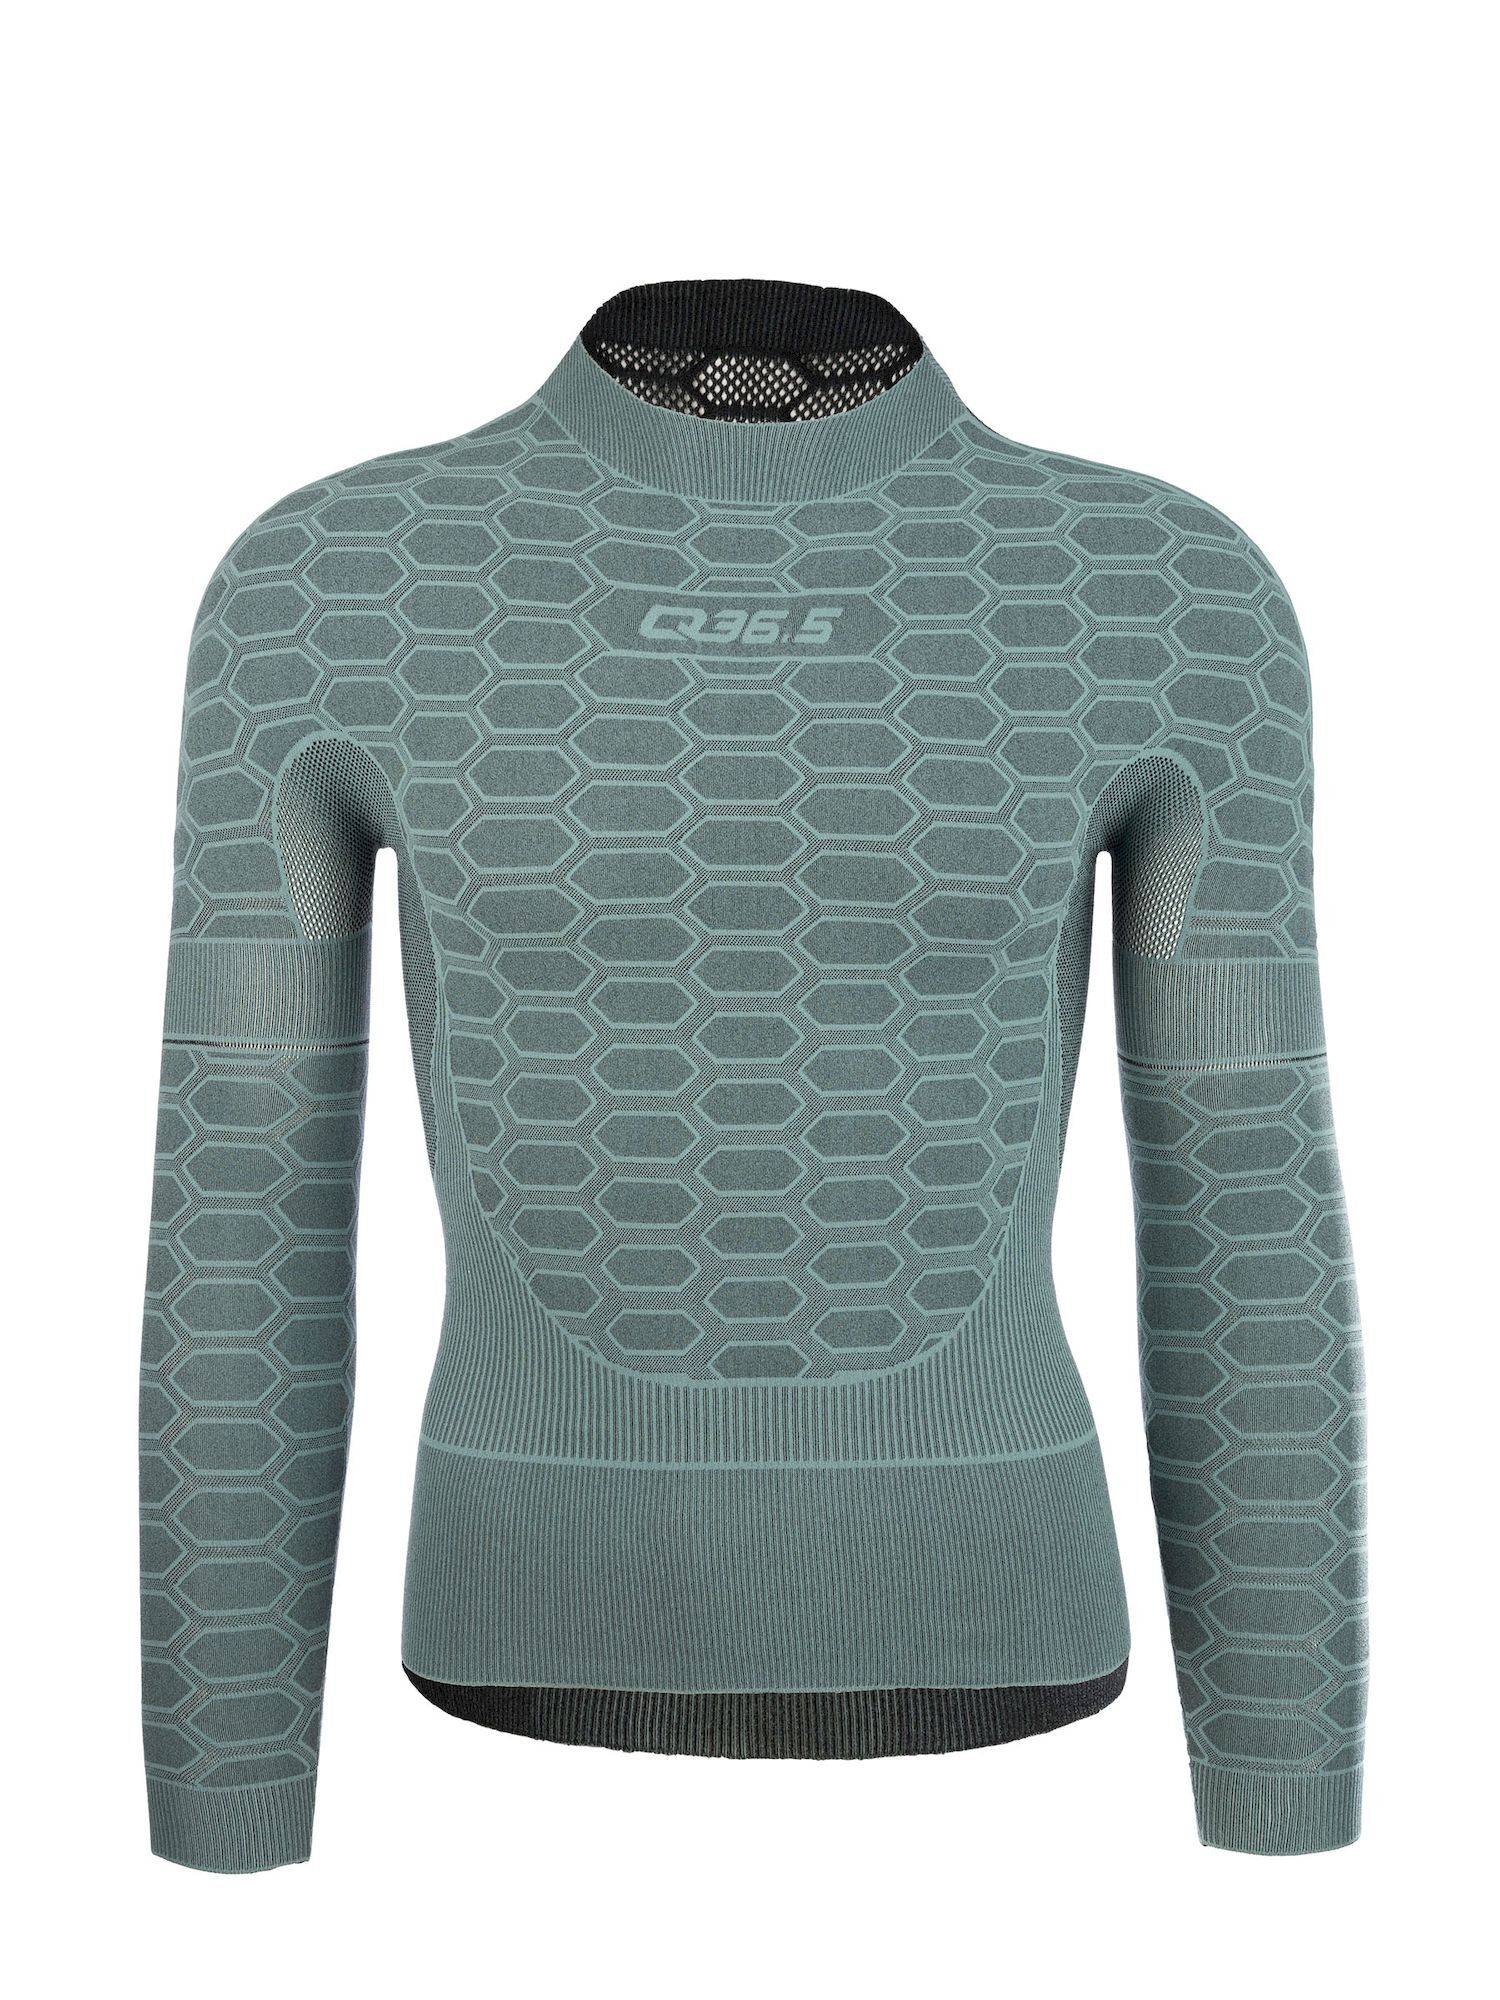 Q36.5 Base layer 3 long sleeve Antracite - Base layer - Men's